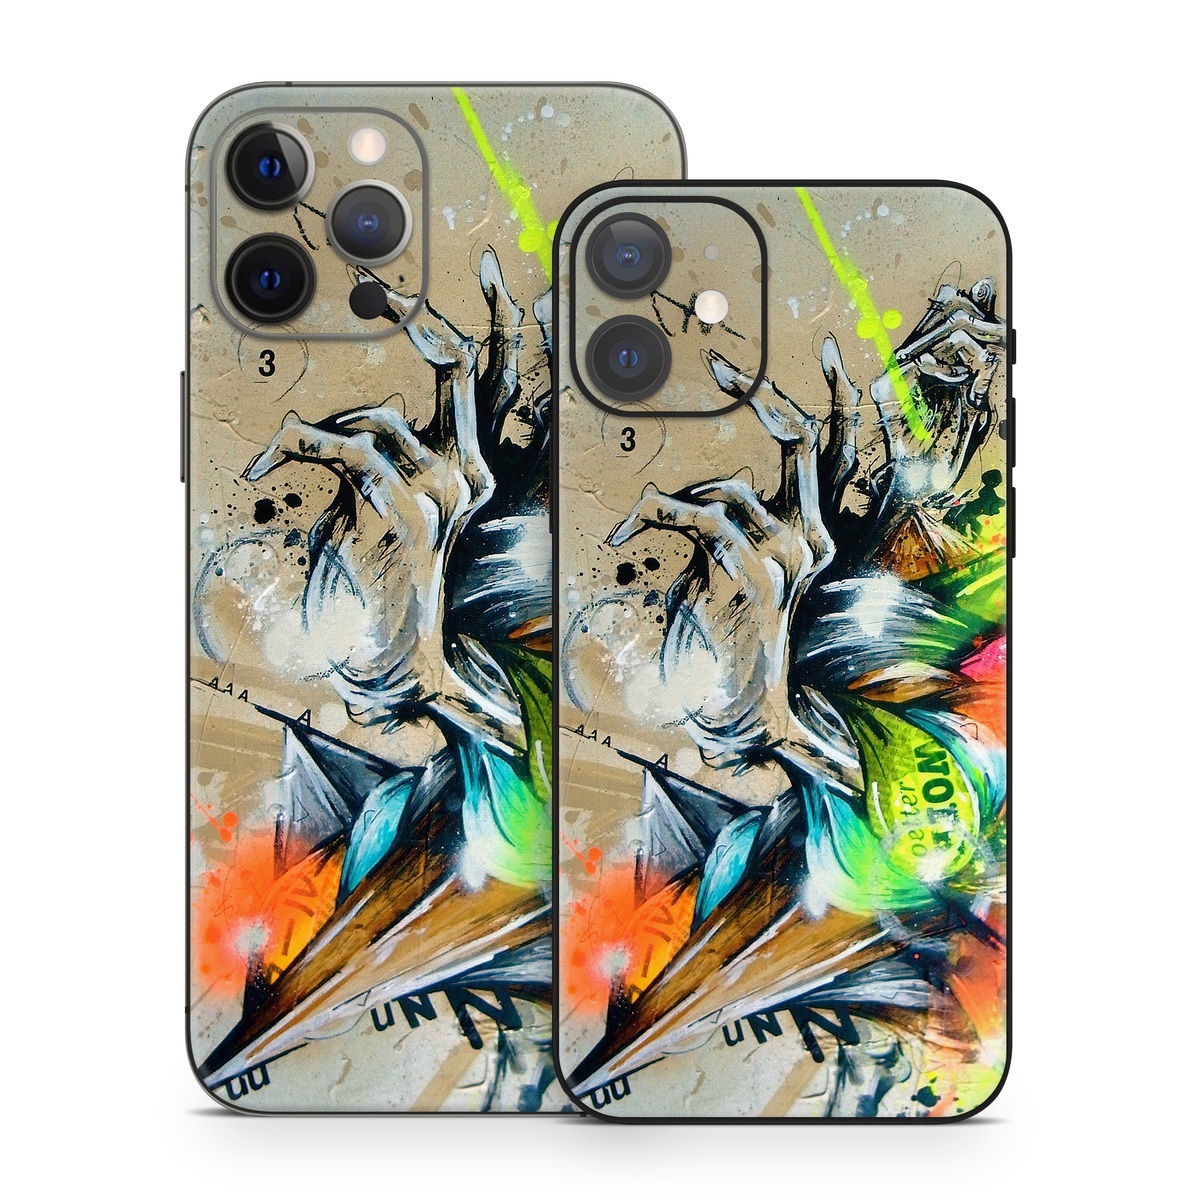 iPhone 12 Series Skin design of Graphic design, Art, Illustration, Fictional character, Visual arts, Graphics, Painting, Watercolor paint, Modern art, Games, with gray, black, green, red, orange, pink colors